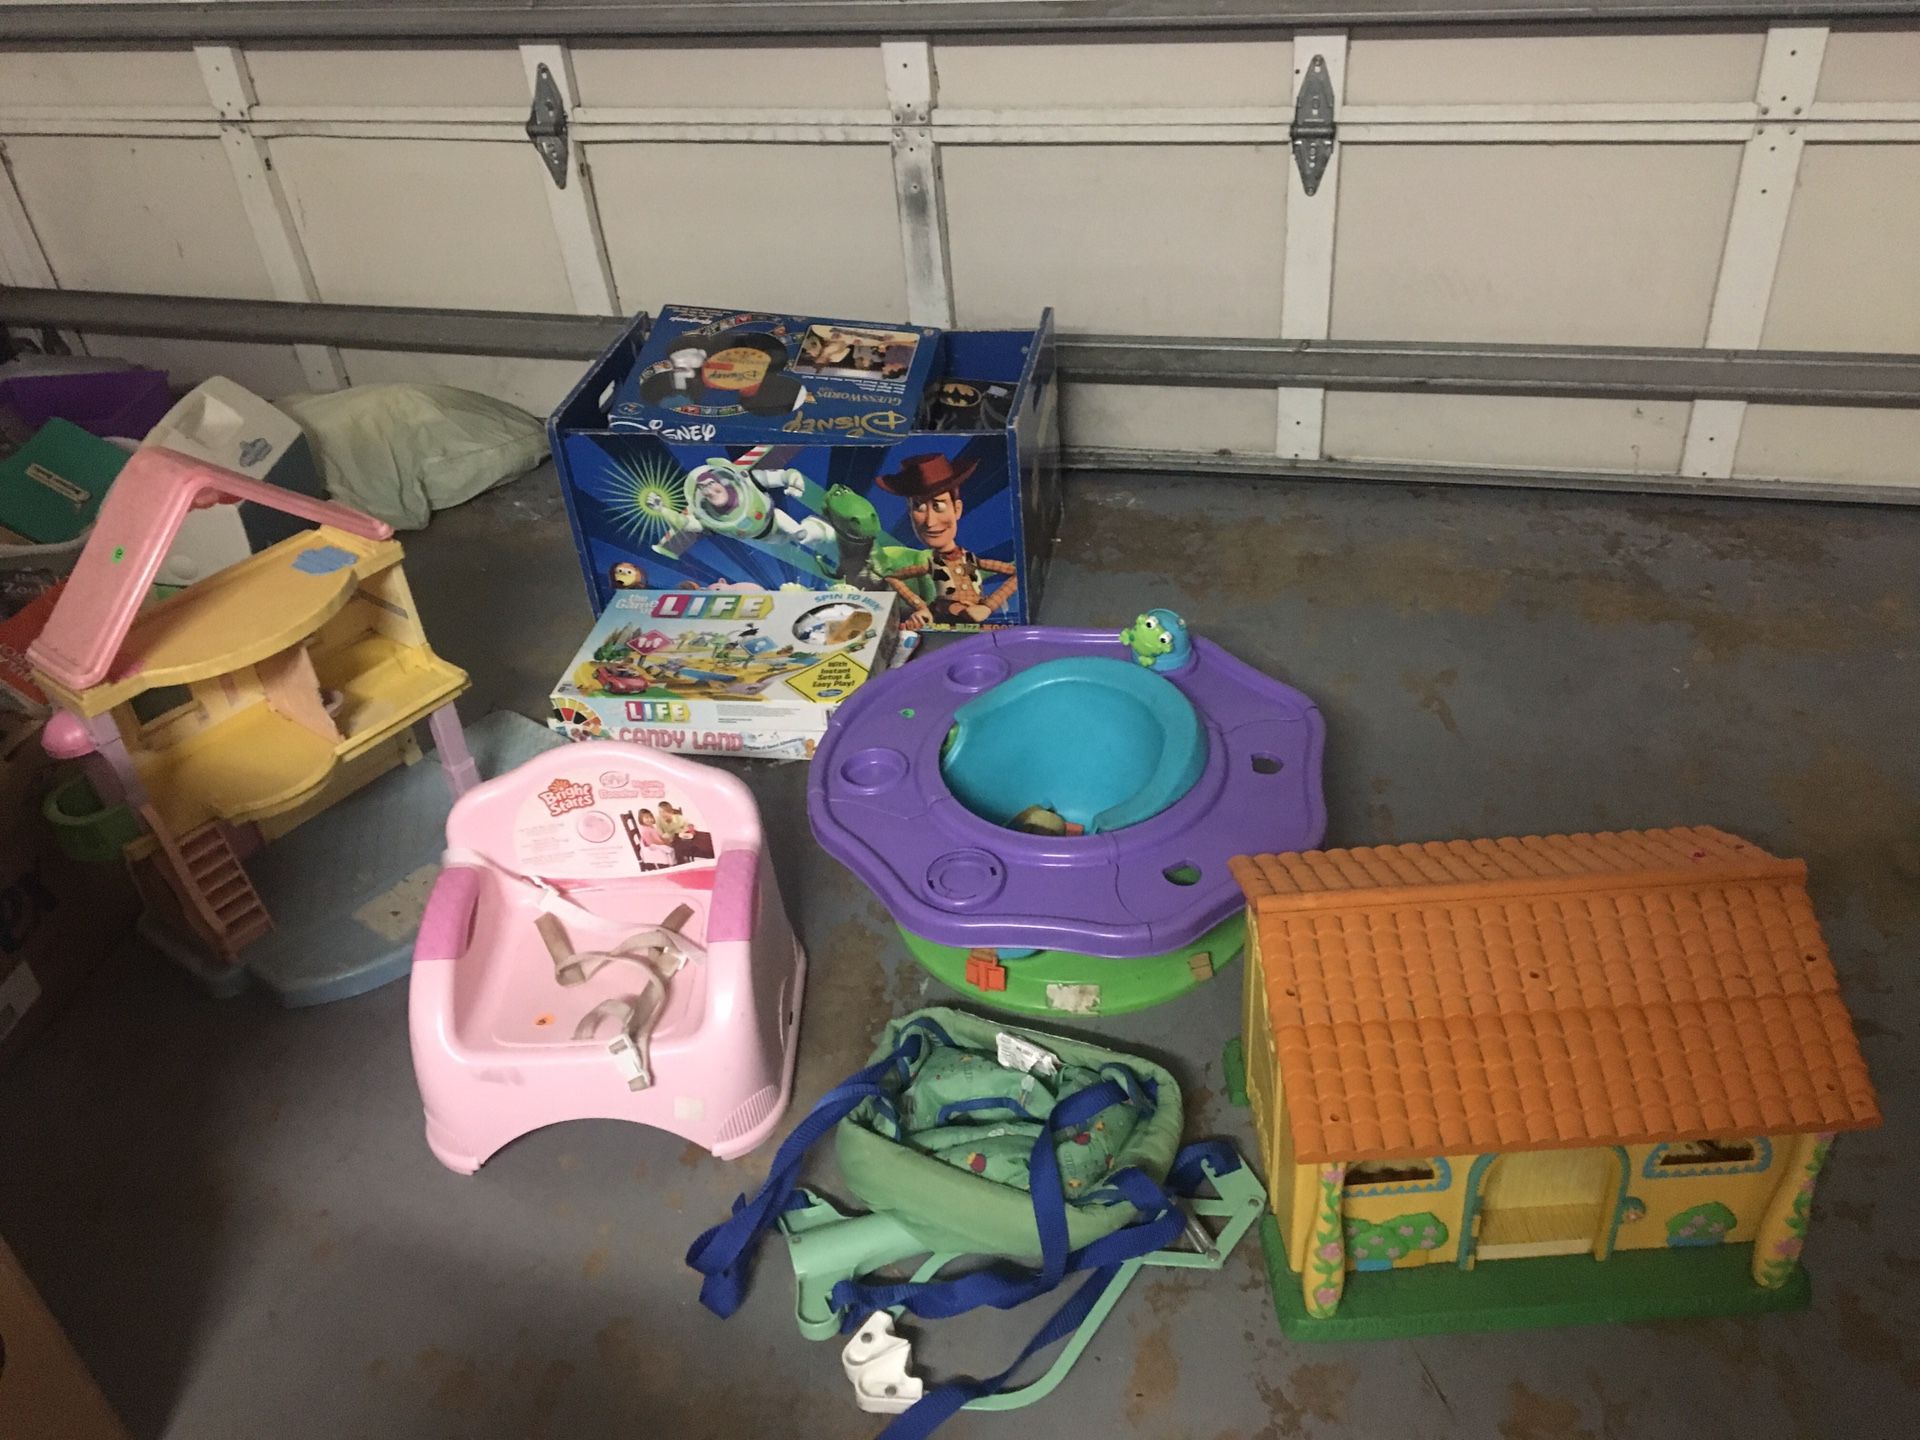 2 dollhouses, baby jumper, booster chair, bumbo chair with activity tray,toy box with games and stuffed animals